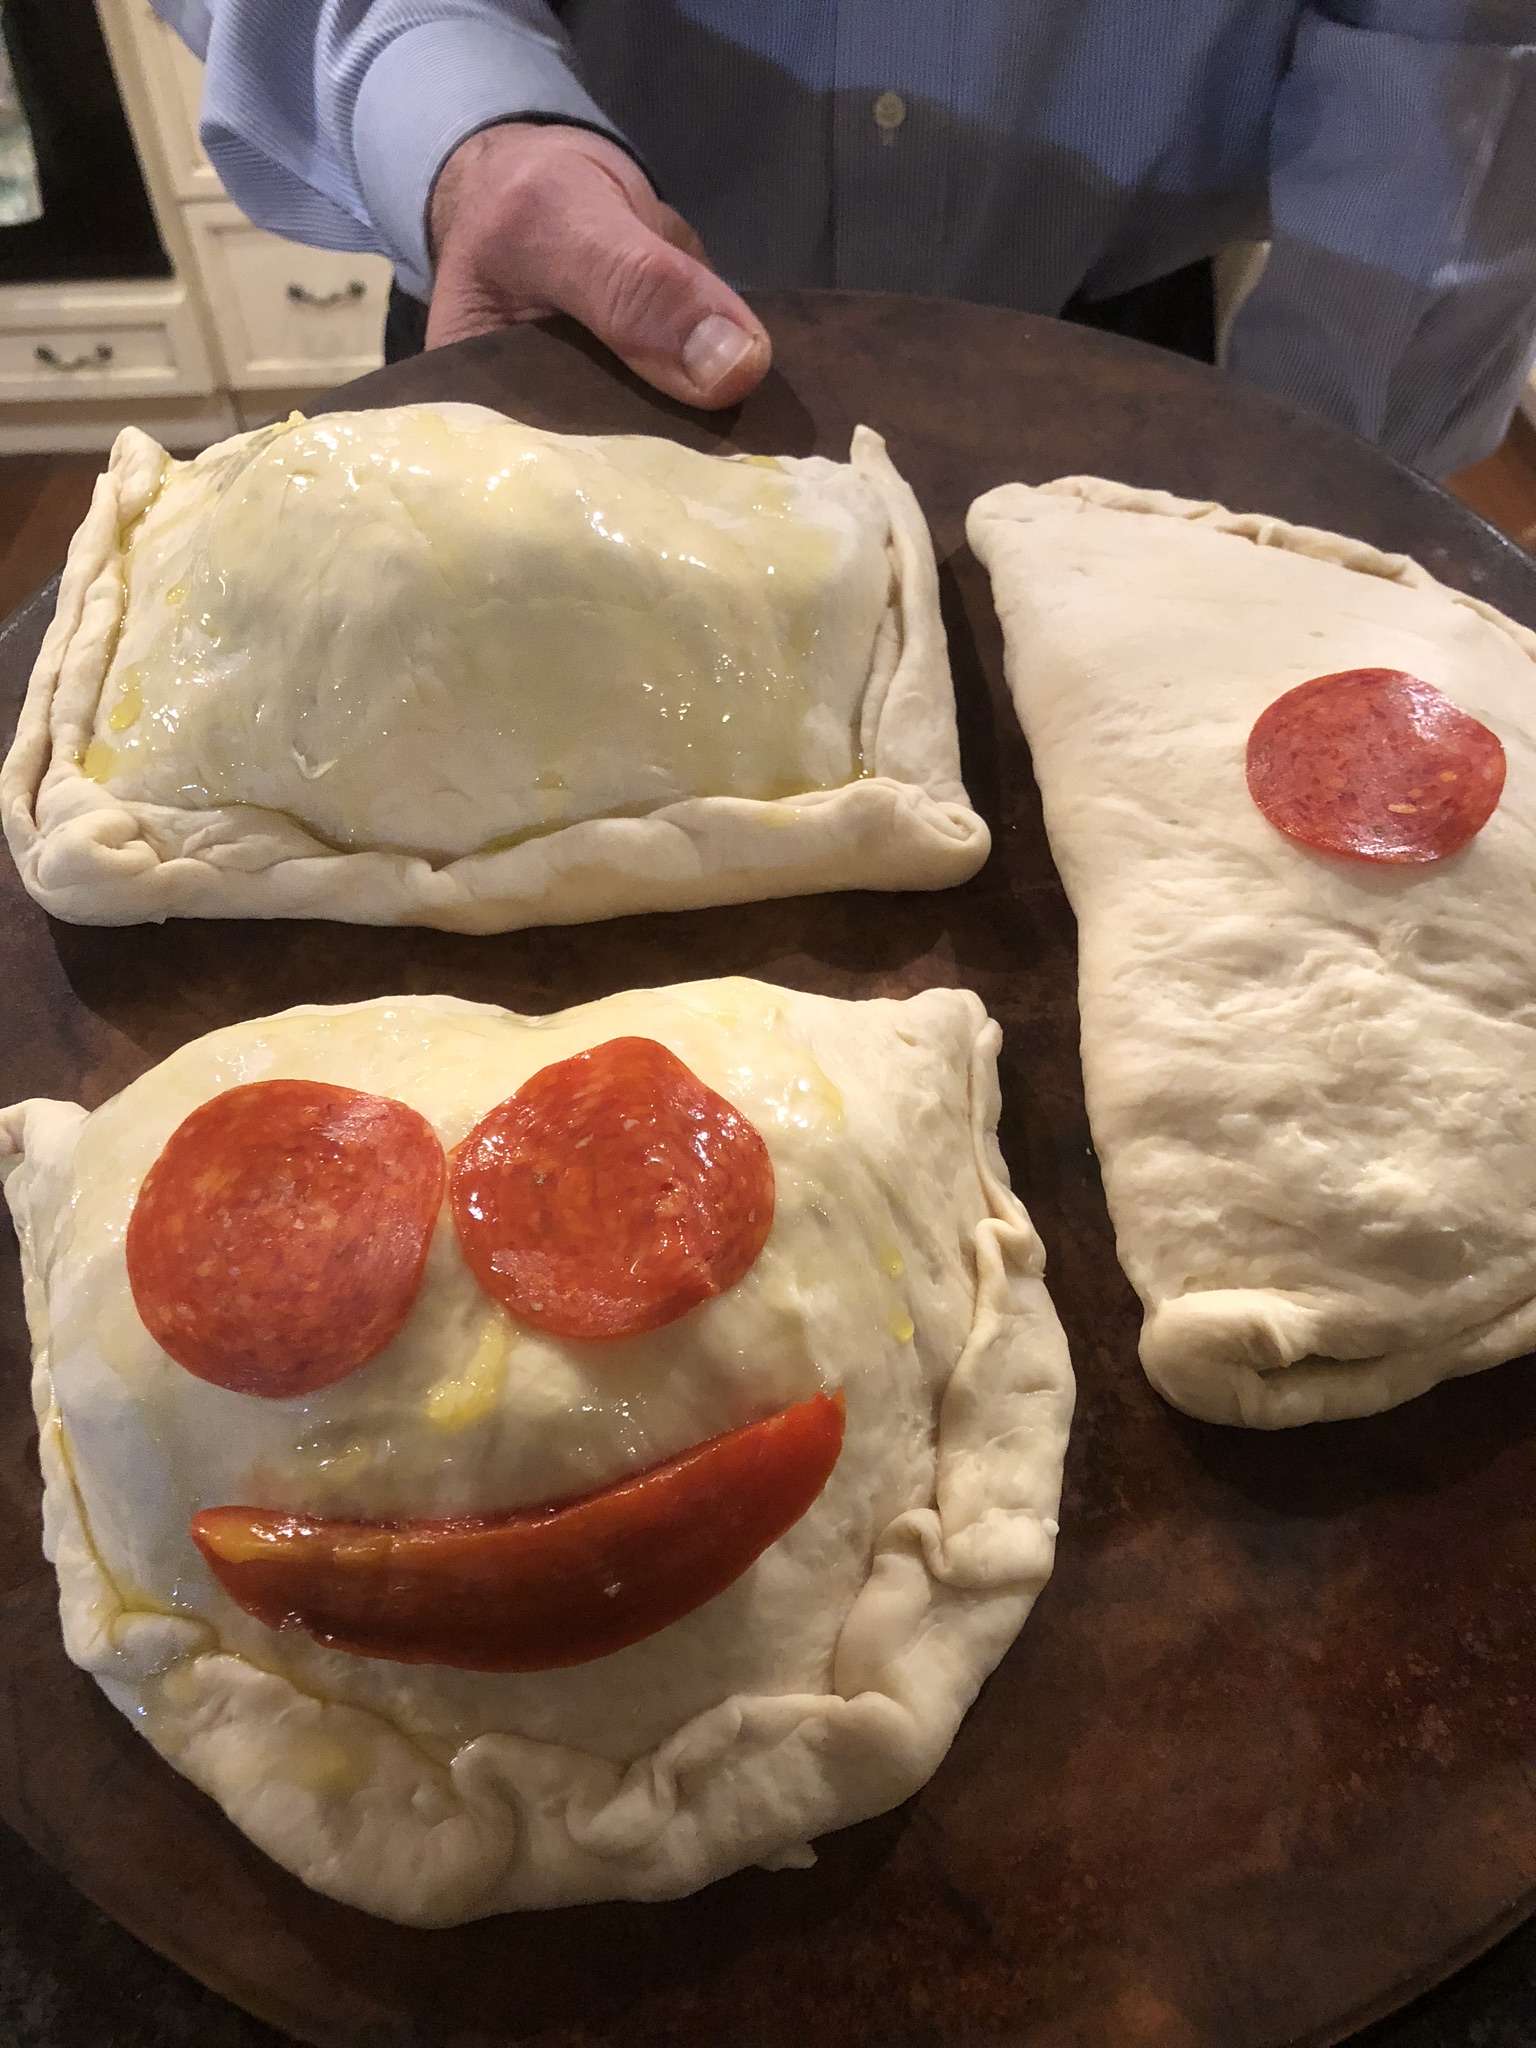 Homemade calzone stuffed with Mozzarella and other fillings 